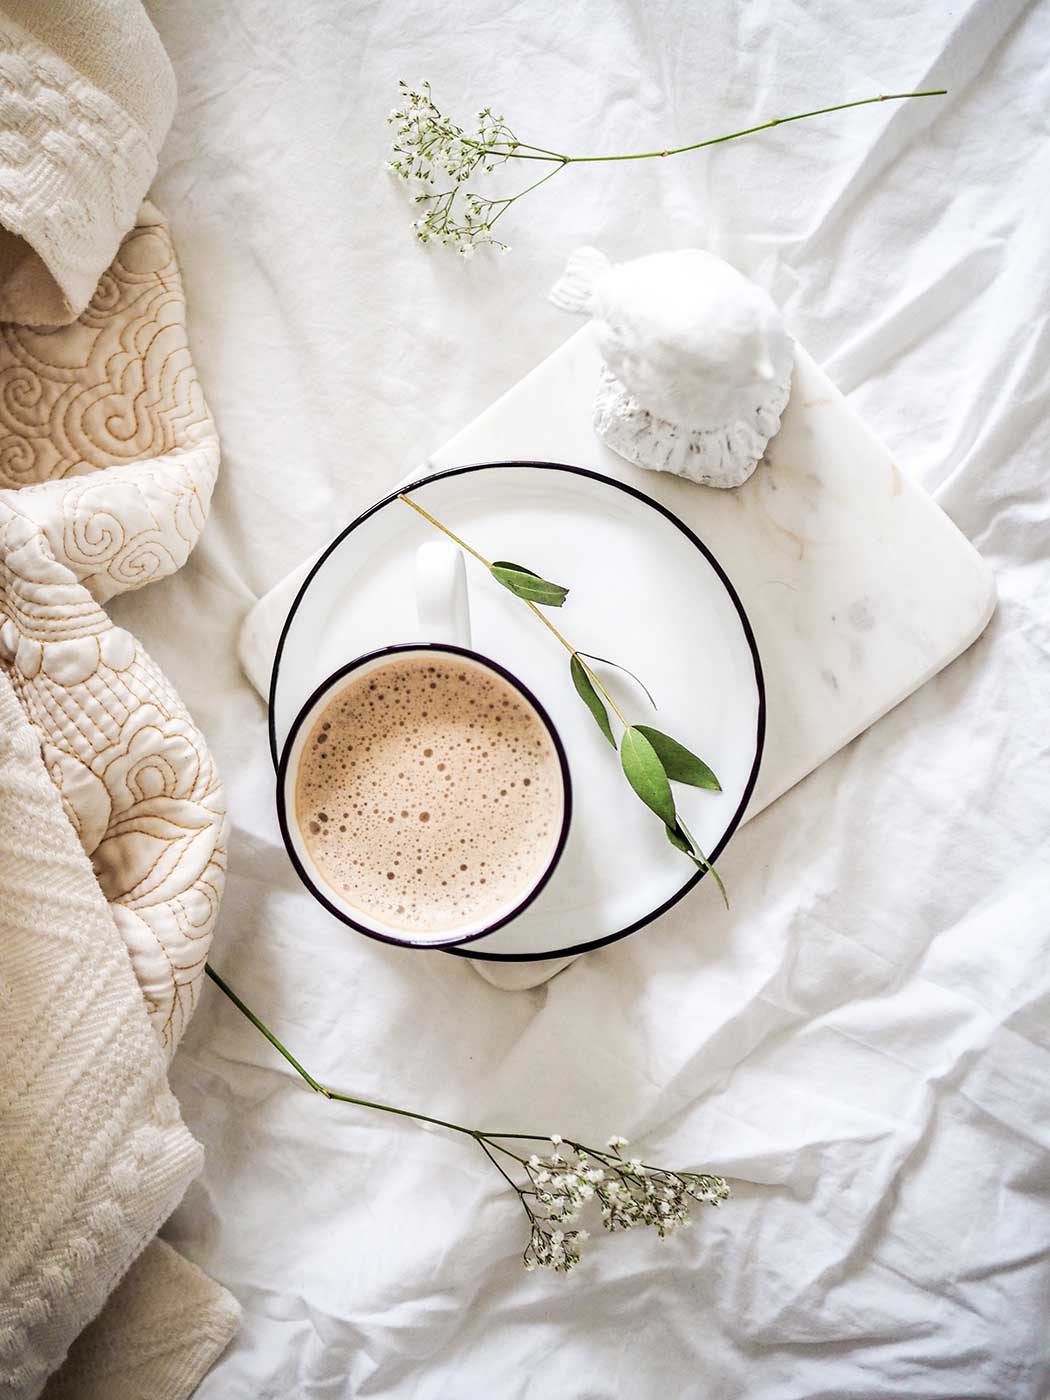 Flat lay photography featuring coffee and flowers on white bedsheets.